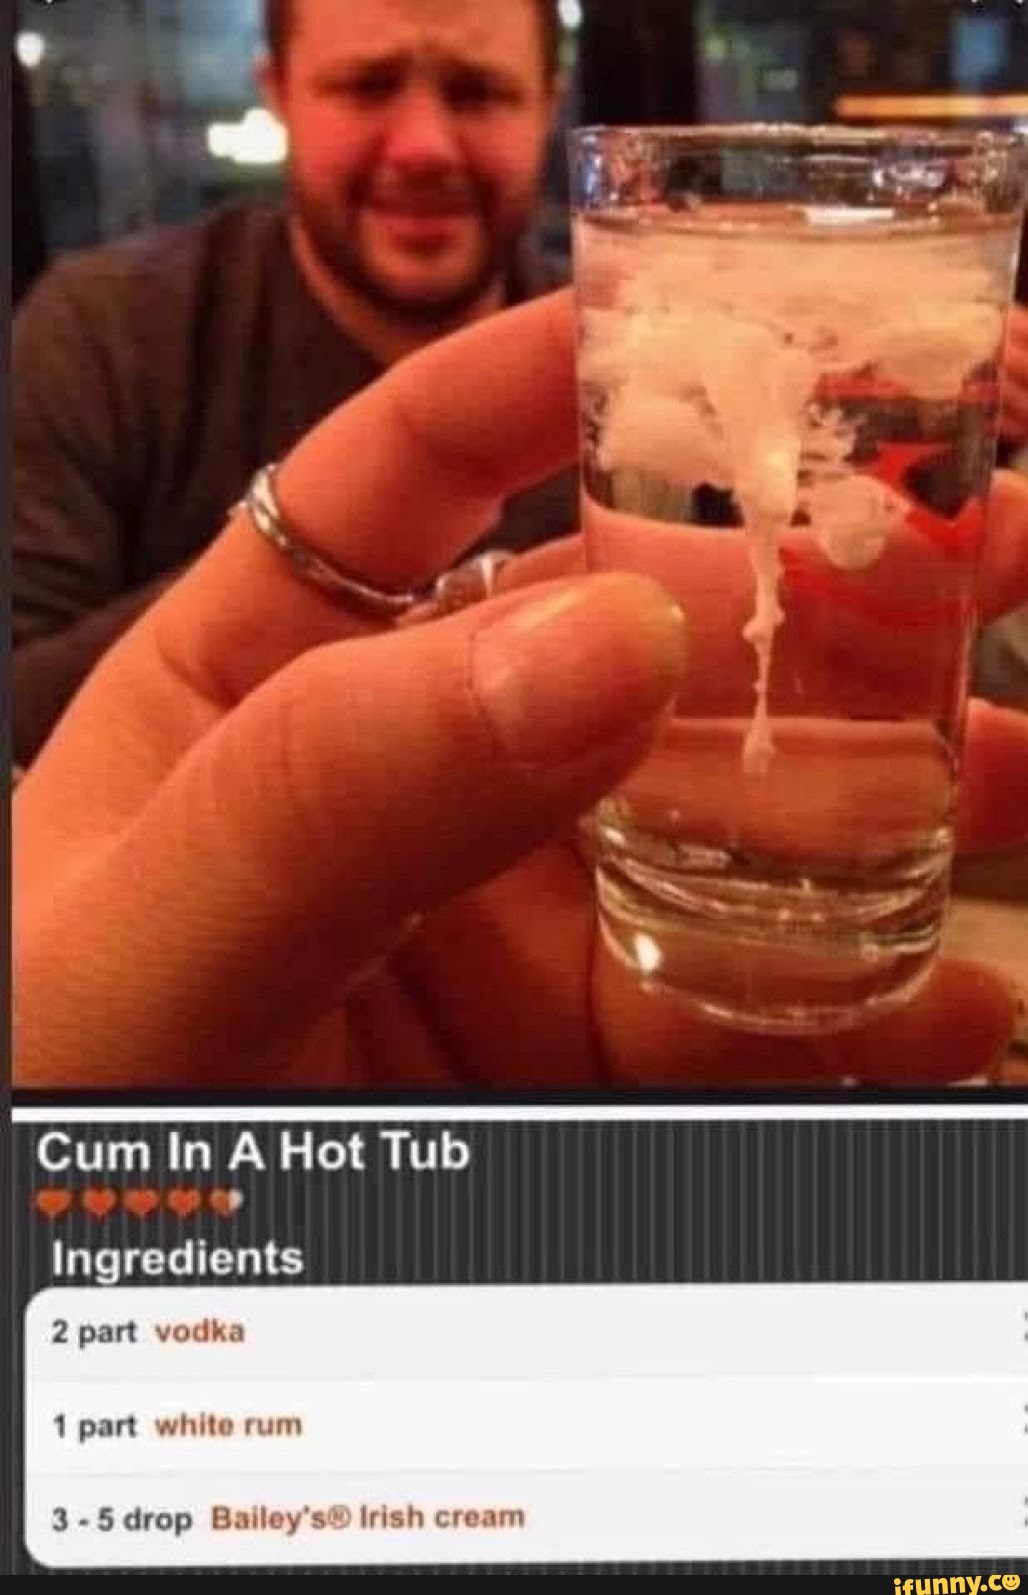 bradley harker recommends Cum In A Hot Tub Drink